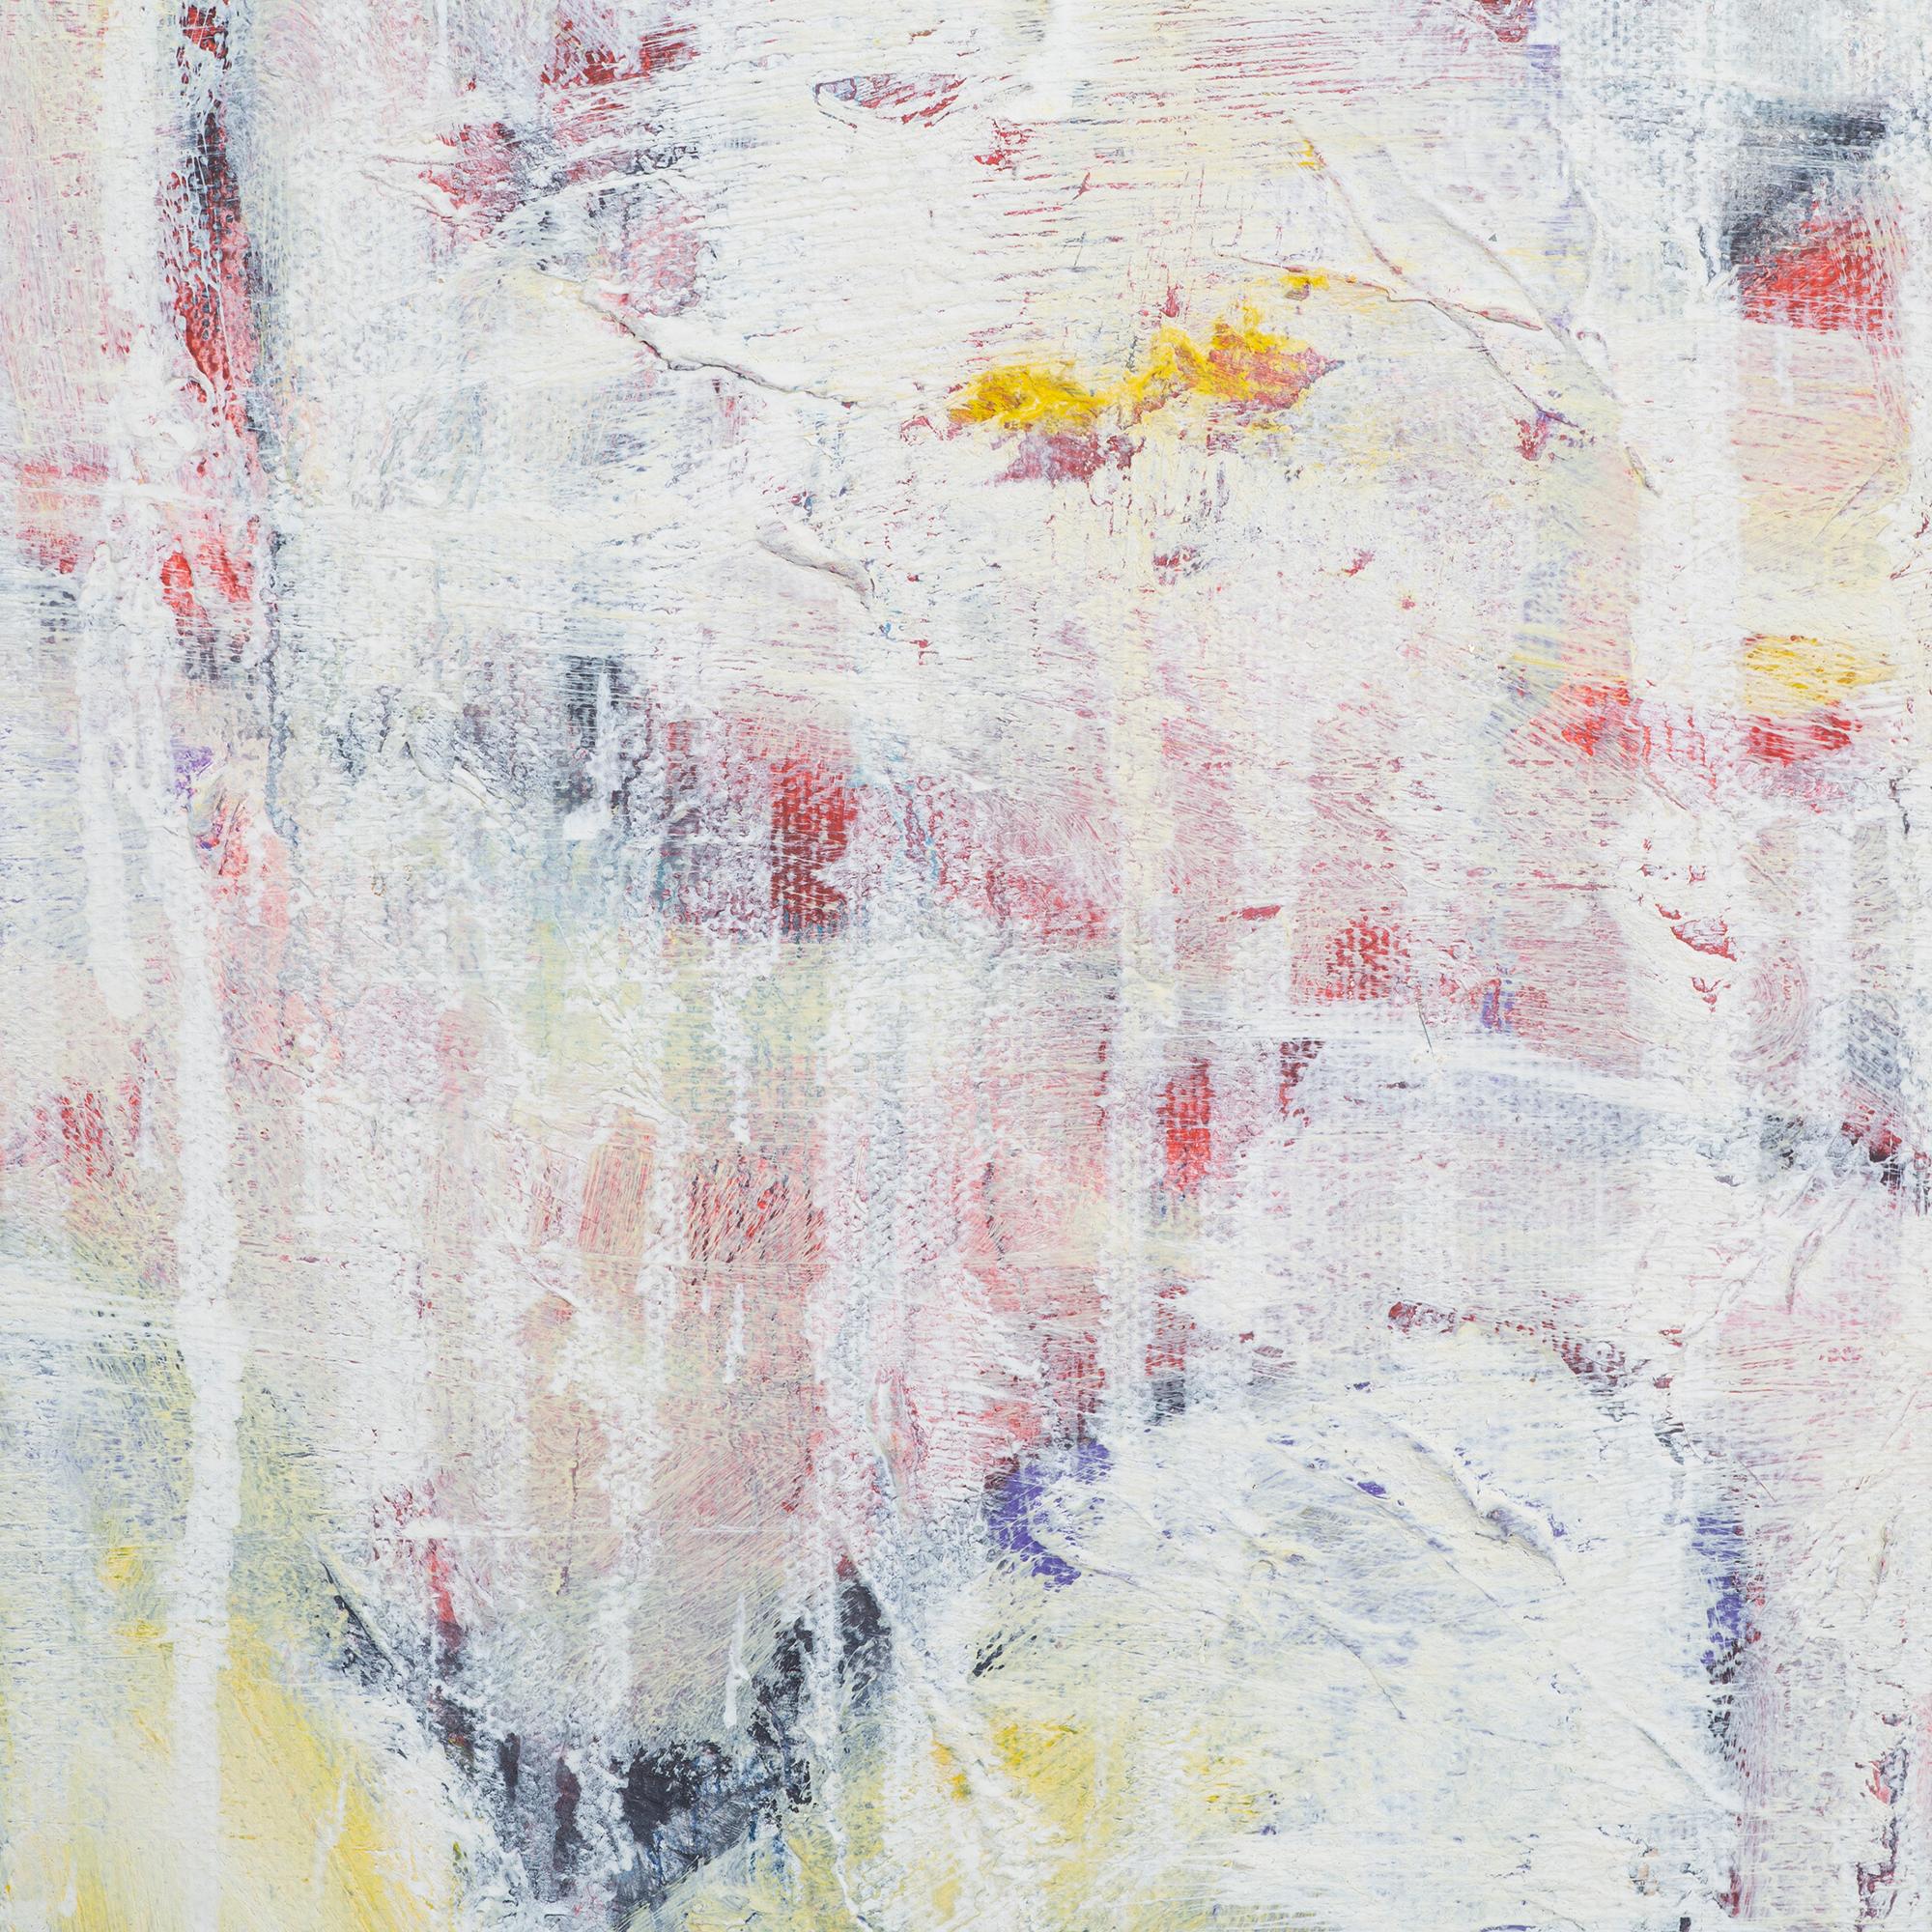 White Night - Abstract Expressionist Painting by Ford Crull